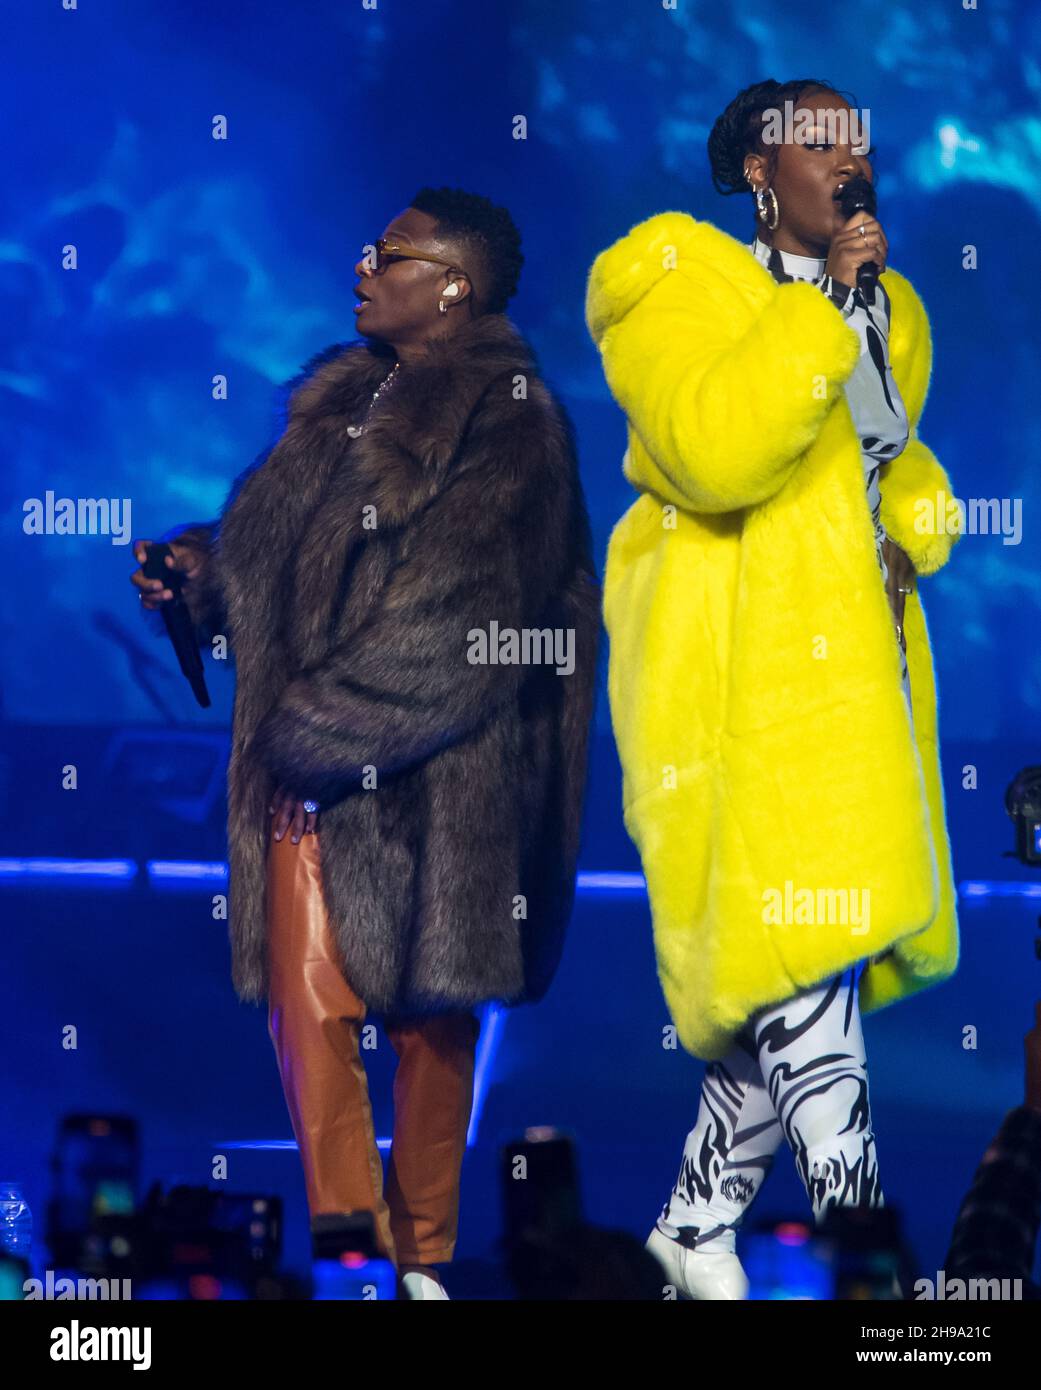 London, UK. 1st December 2021. Wizkid & Tems performs at The O2 Arena on Day3. Photographed by Michael Tubi Stock Photo